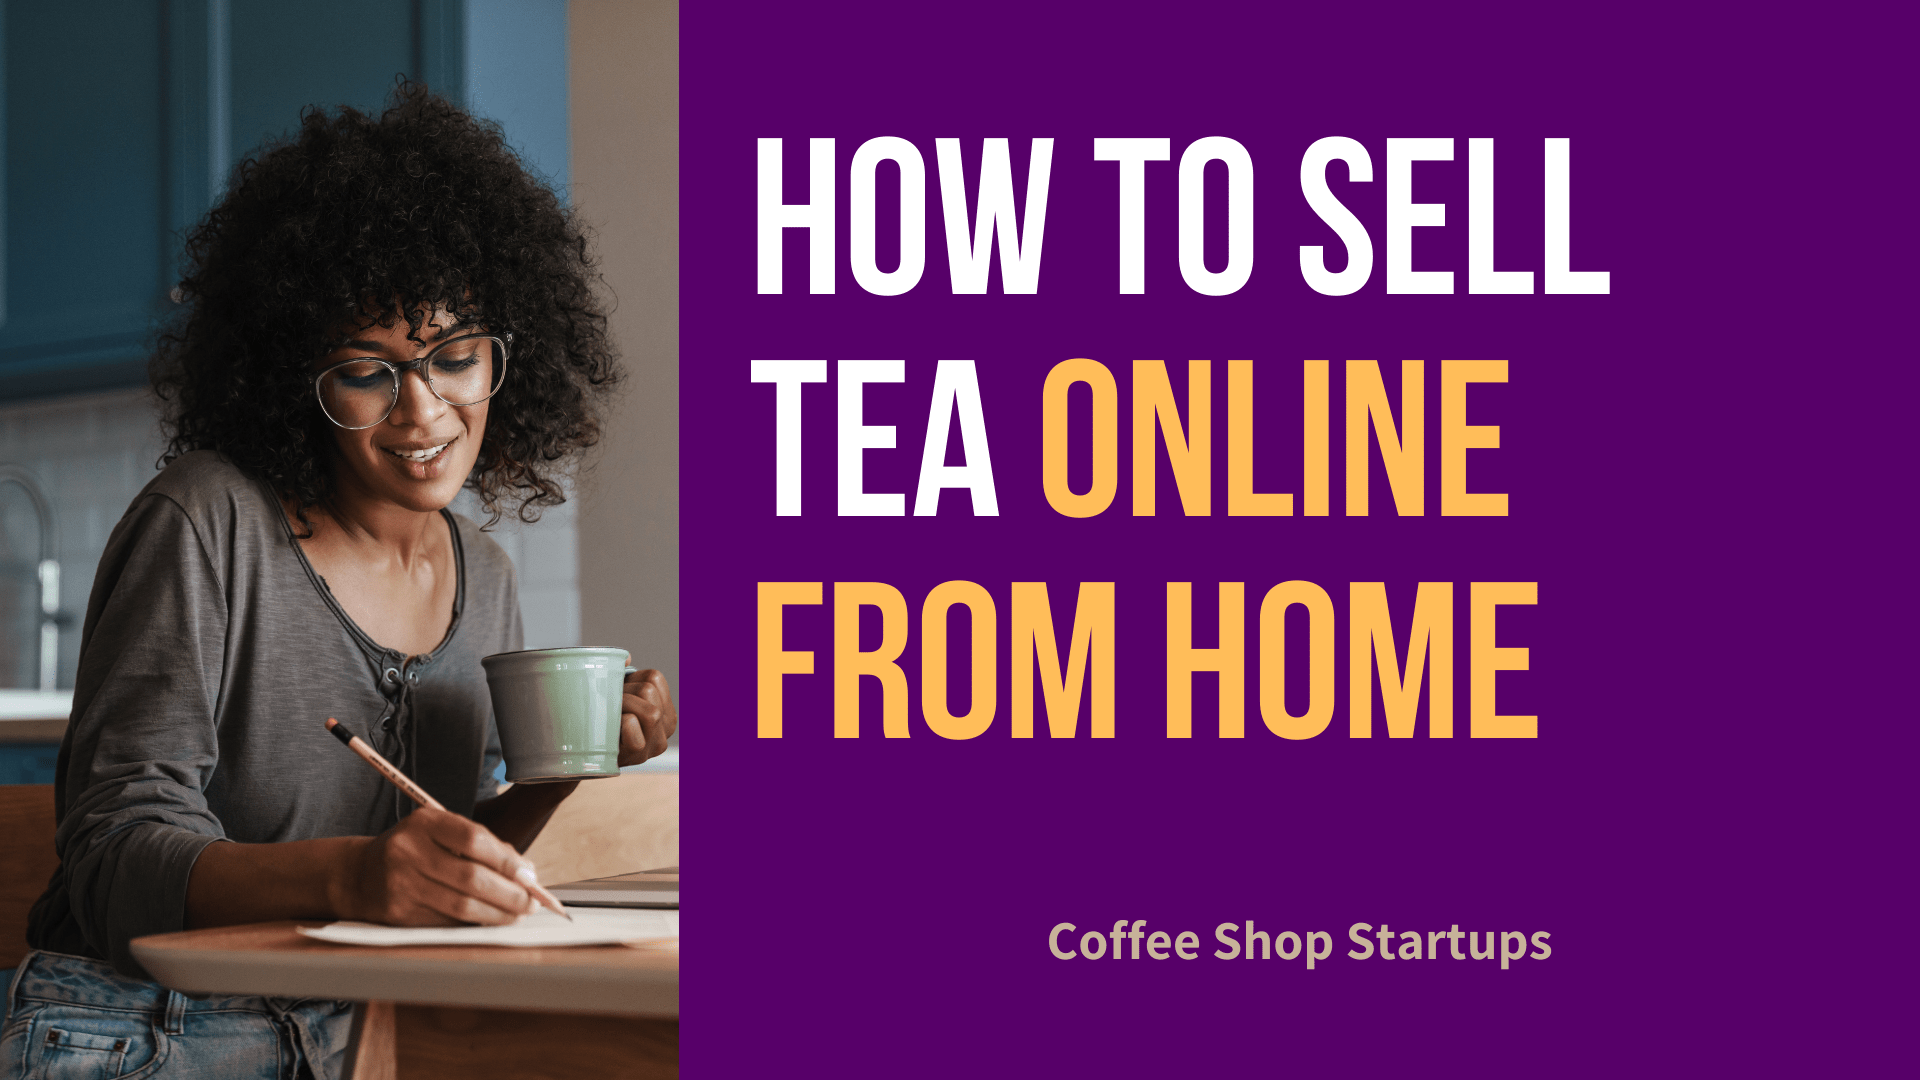 How To Sell Tea Online From Home?